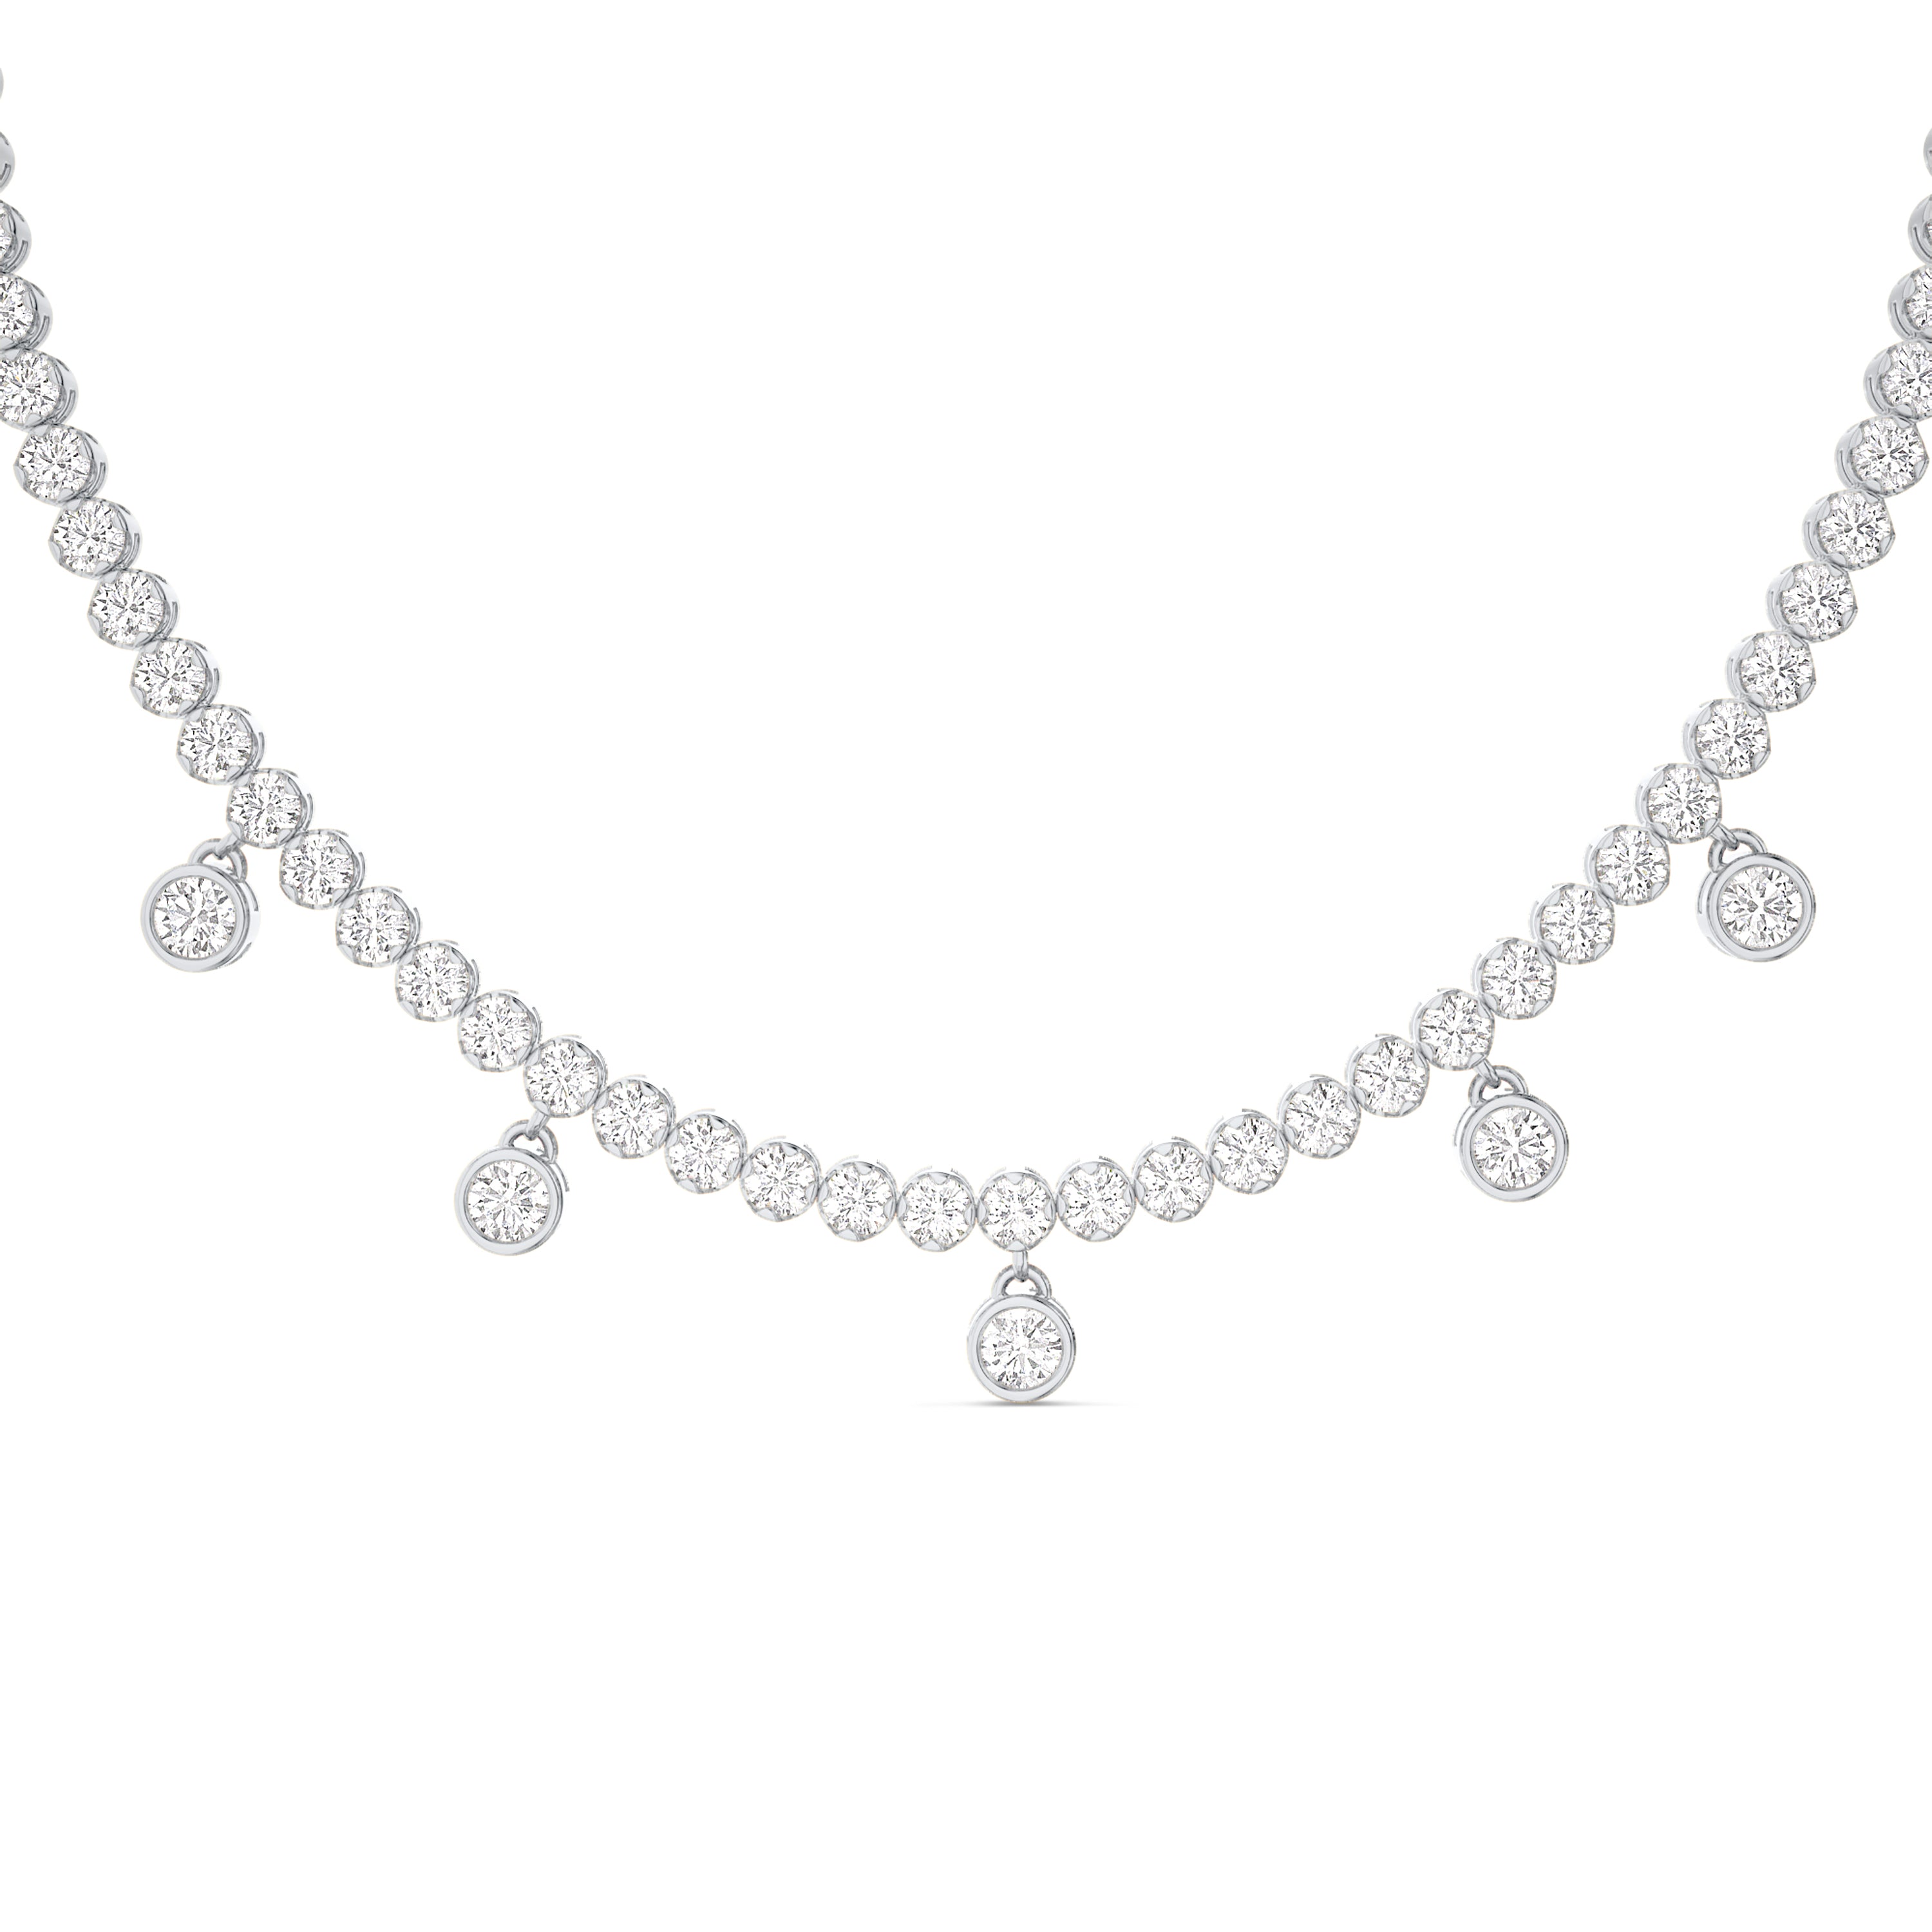 Floating diamond necklace in 18k gold, 3.25 carat, FG color and SI clarity #gold_white